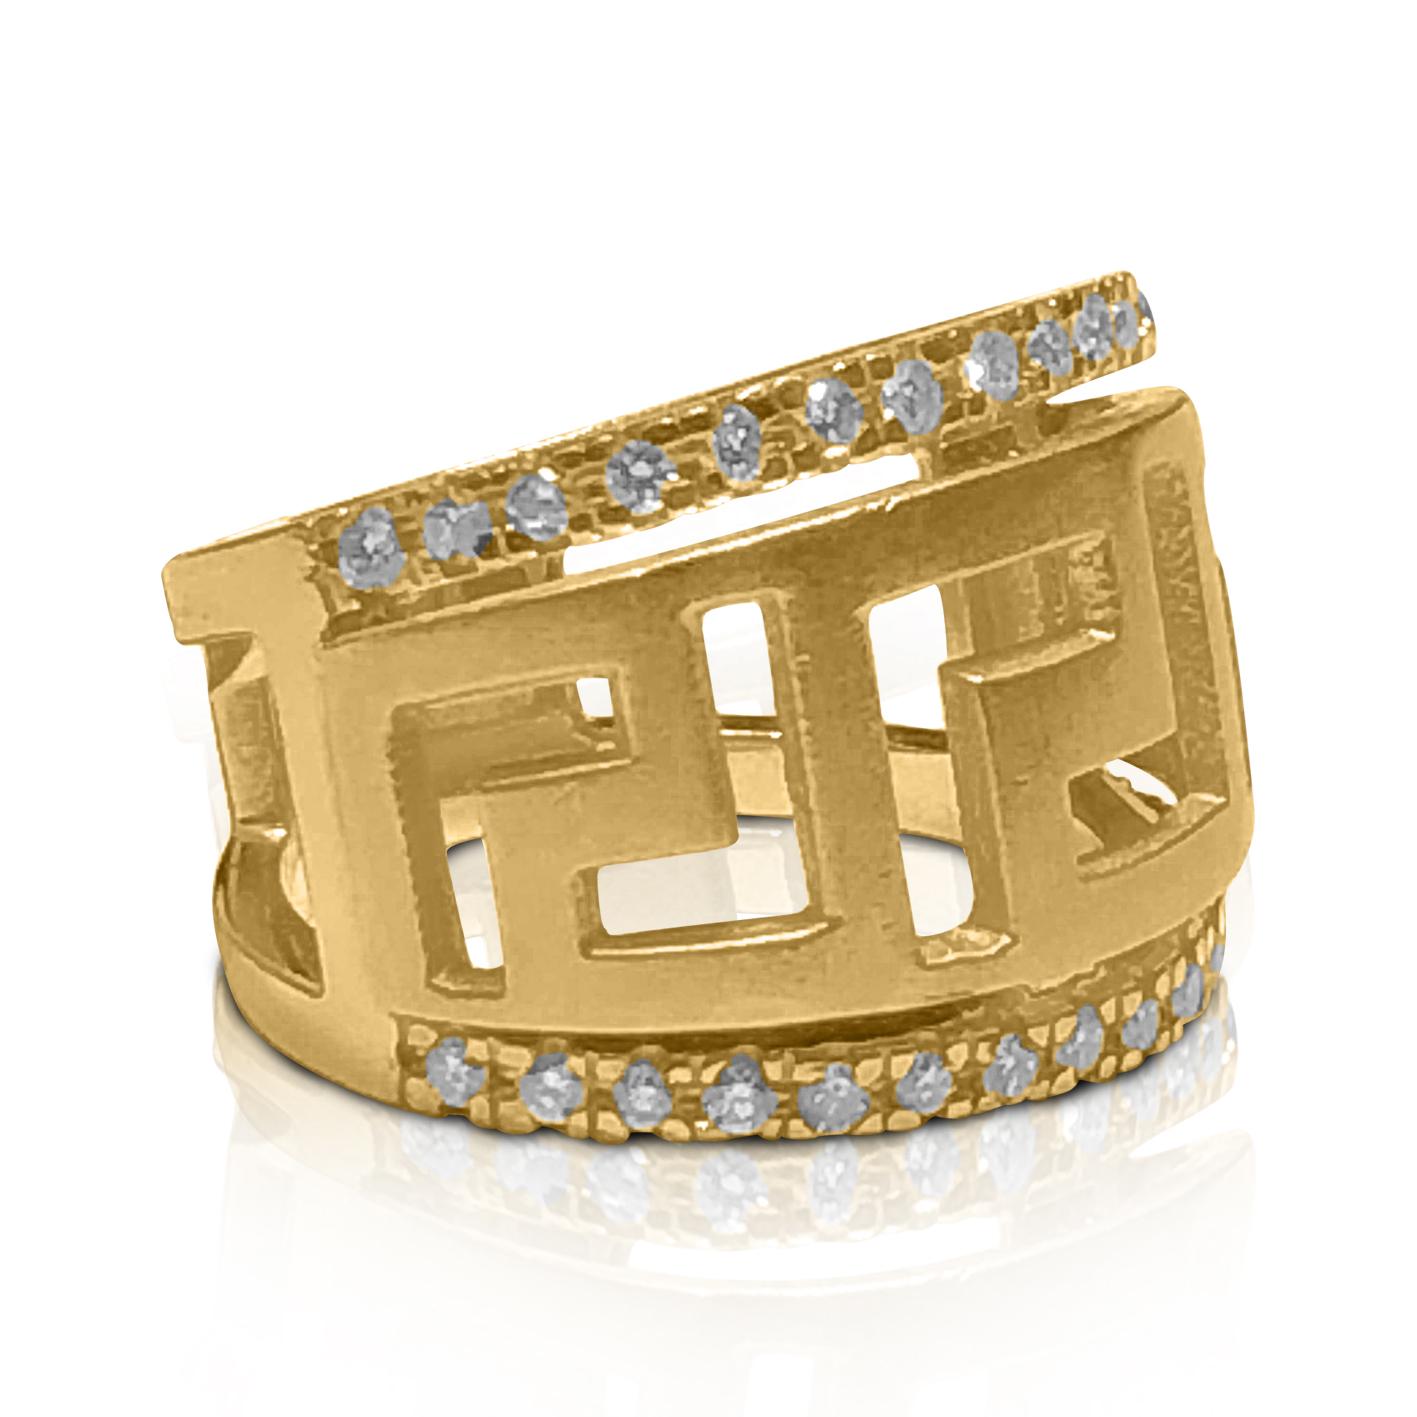 S. Georgios designer 18 Karat Yellow Gold Hand Made Diamond Ring with the Greek Key design that symbolizes eternity. The design is known as the symbol of long life and is one of the most classic designs in the world.
The gorgeous Ring is decorated